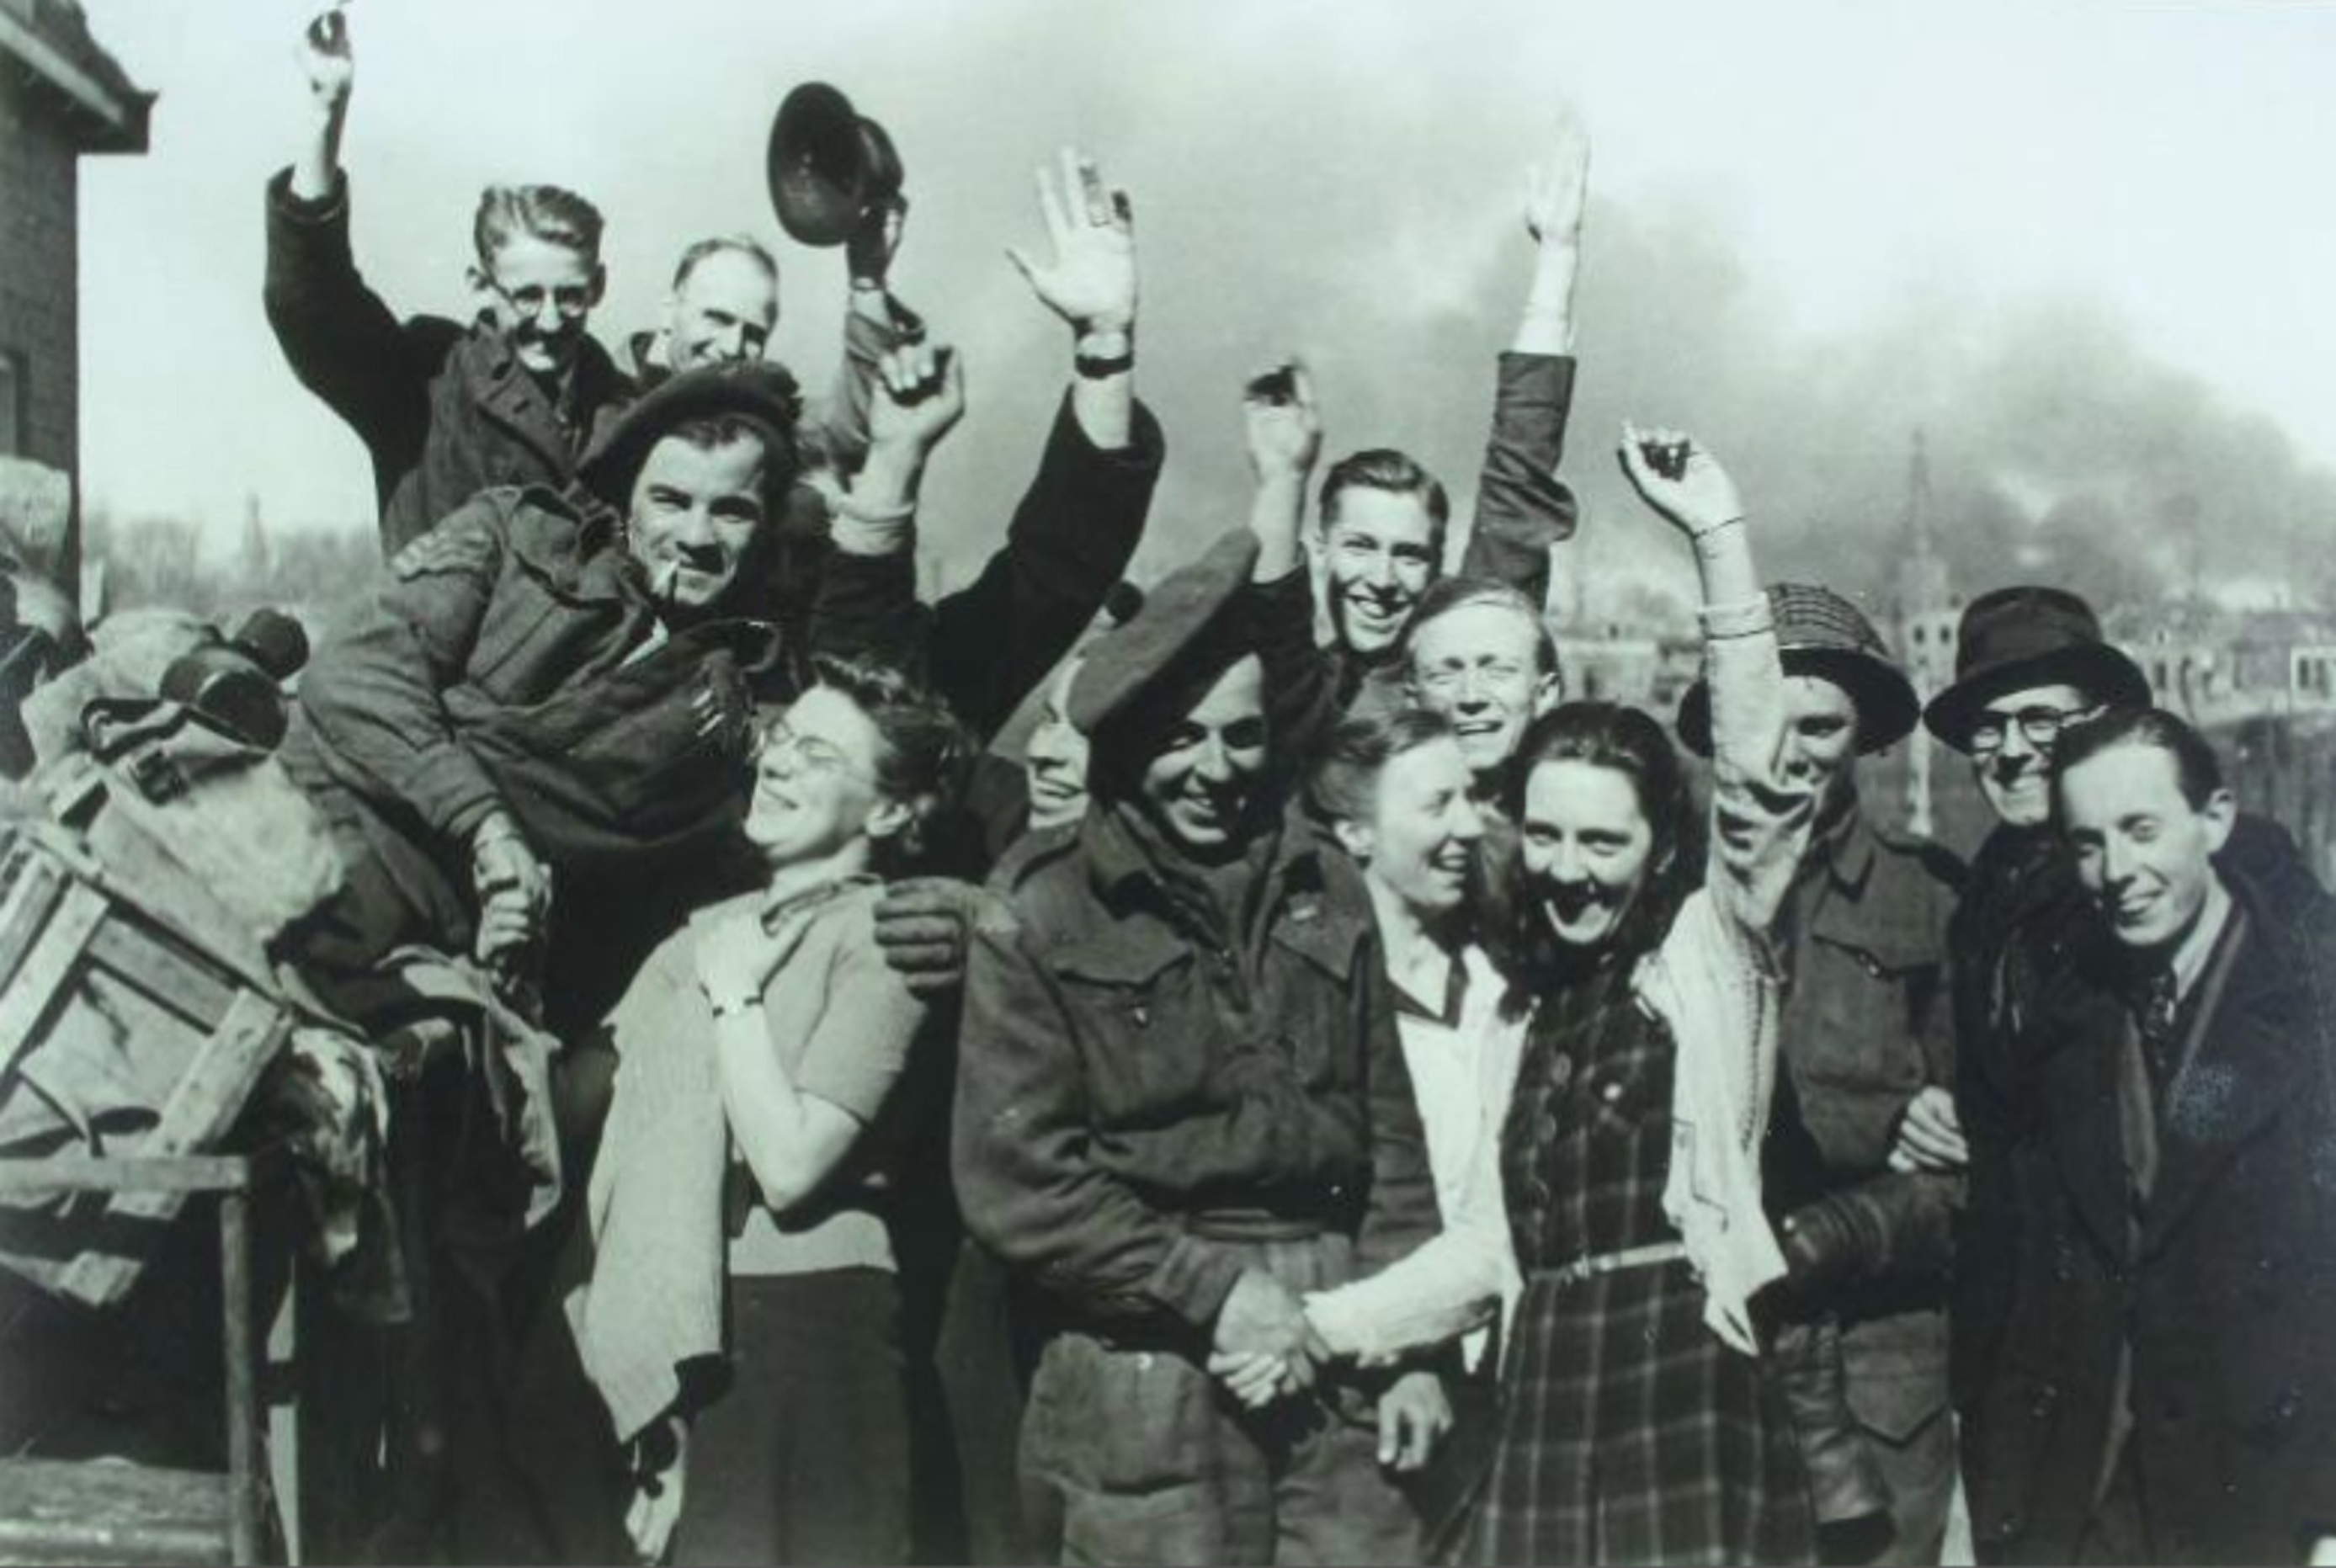 The Glens were warmly welcomed by the residents of the Hobbemakade in Zutphen. On the left "Len" Menzies, in the middle Joseph Hinds and on the right, hidden behind an arm, W.Giroux. Joseph Hinds died three weeks later while crossing the river Ems in northern Germany. (foto: Stedelijk Museum Zutphen)